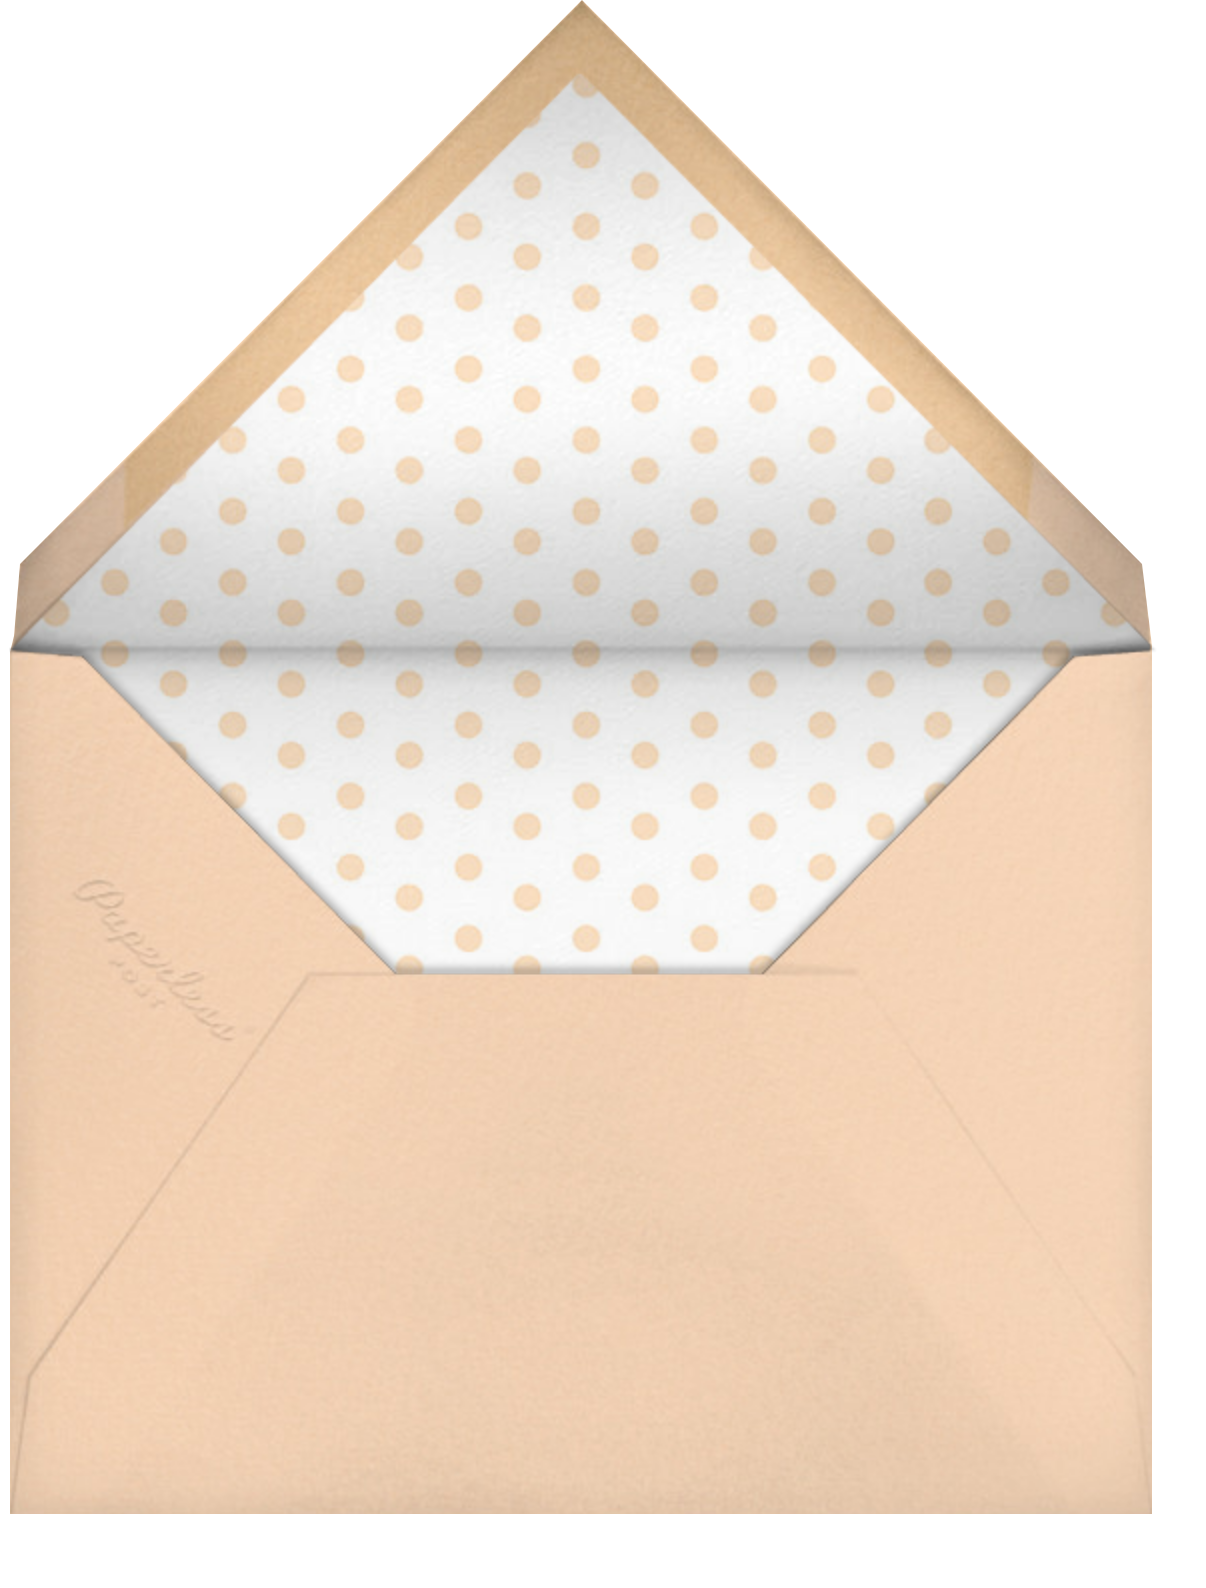 Bunny Bums (Greeting) - Paperless Post - Envelope